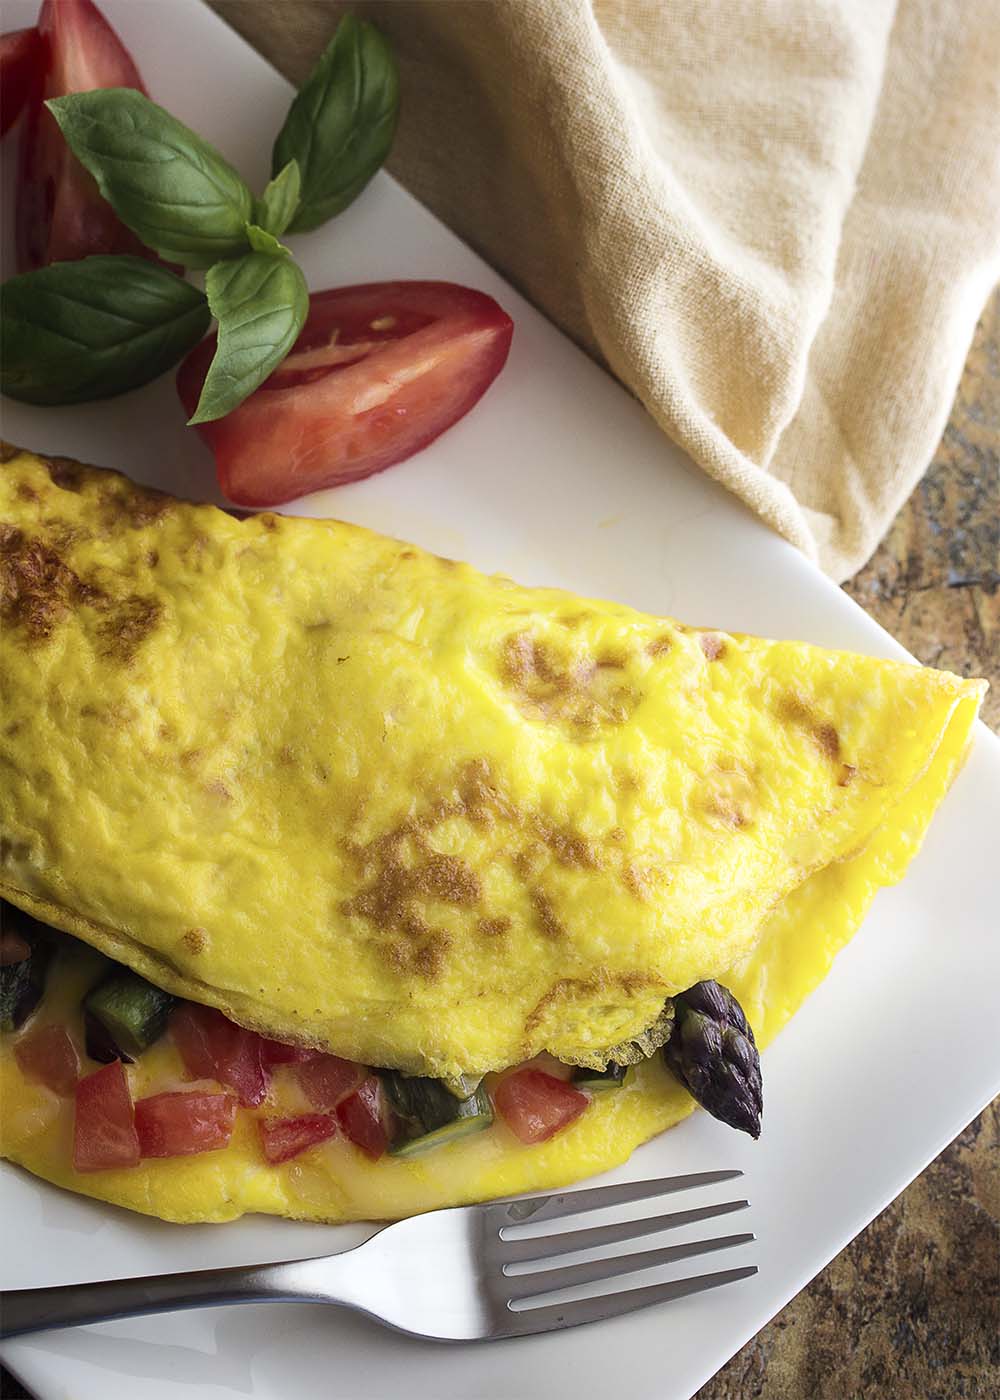 Take advantage of fresh asparagus to make a healthy spring omelette! This asparagus omelette is full of smoked gouda cheese, sauteed onions, and tomatoes. Great for breakfast, brunch, or even dinner. | justalittlebitofbacon.com